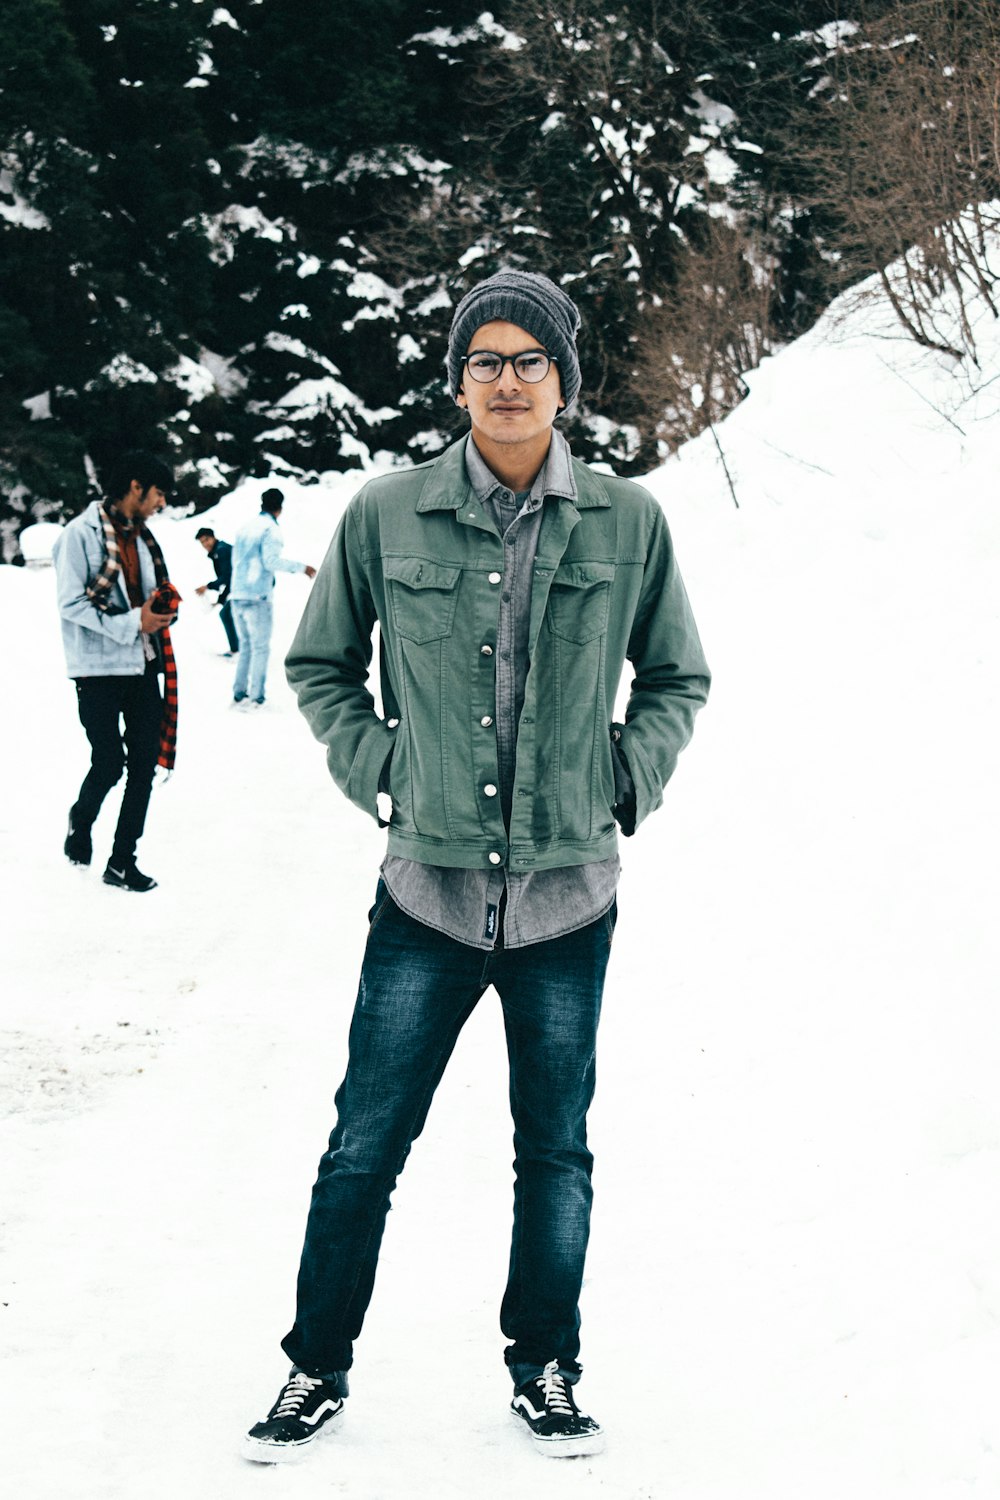 man in green zip up jacket and blue denim jeans standing on snow covered ground during